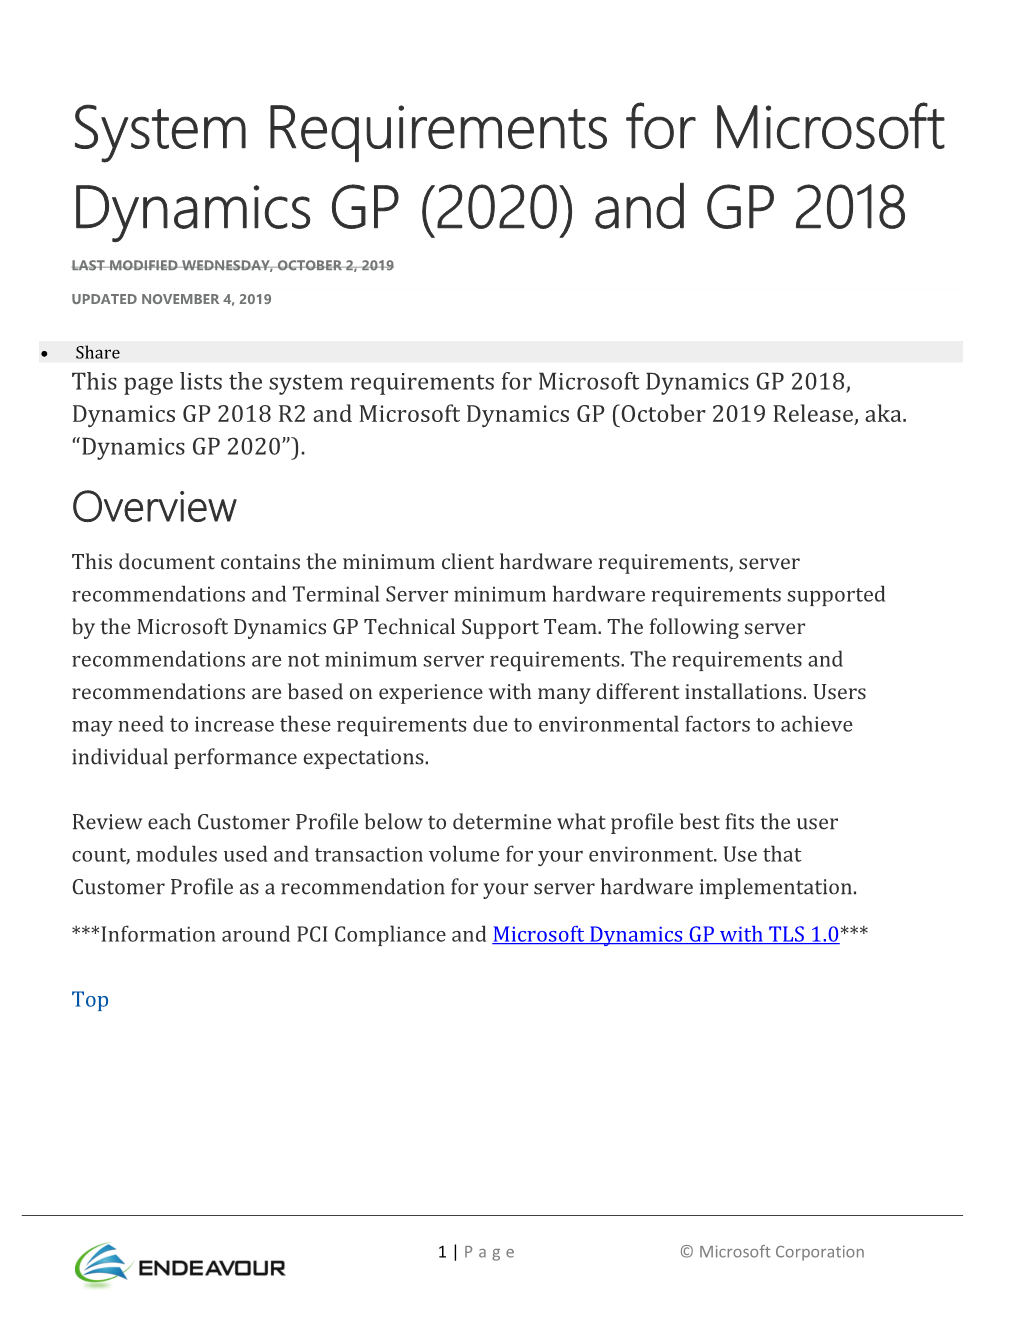 System Requirements for Microsoft Dynamics GP (2020) and GP 2018